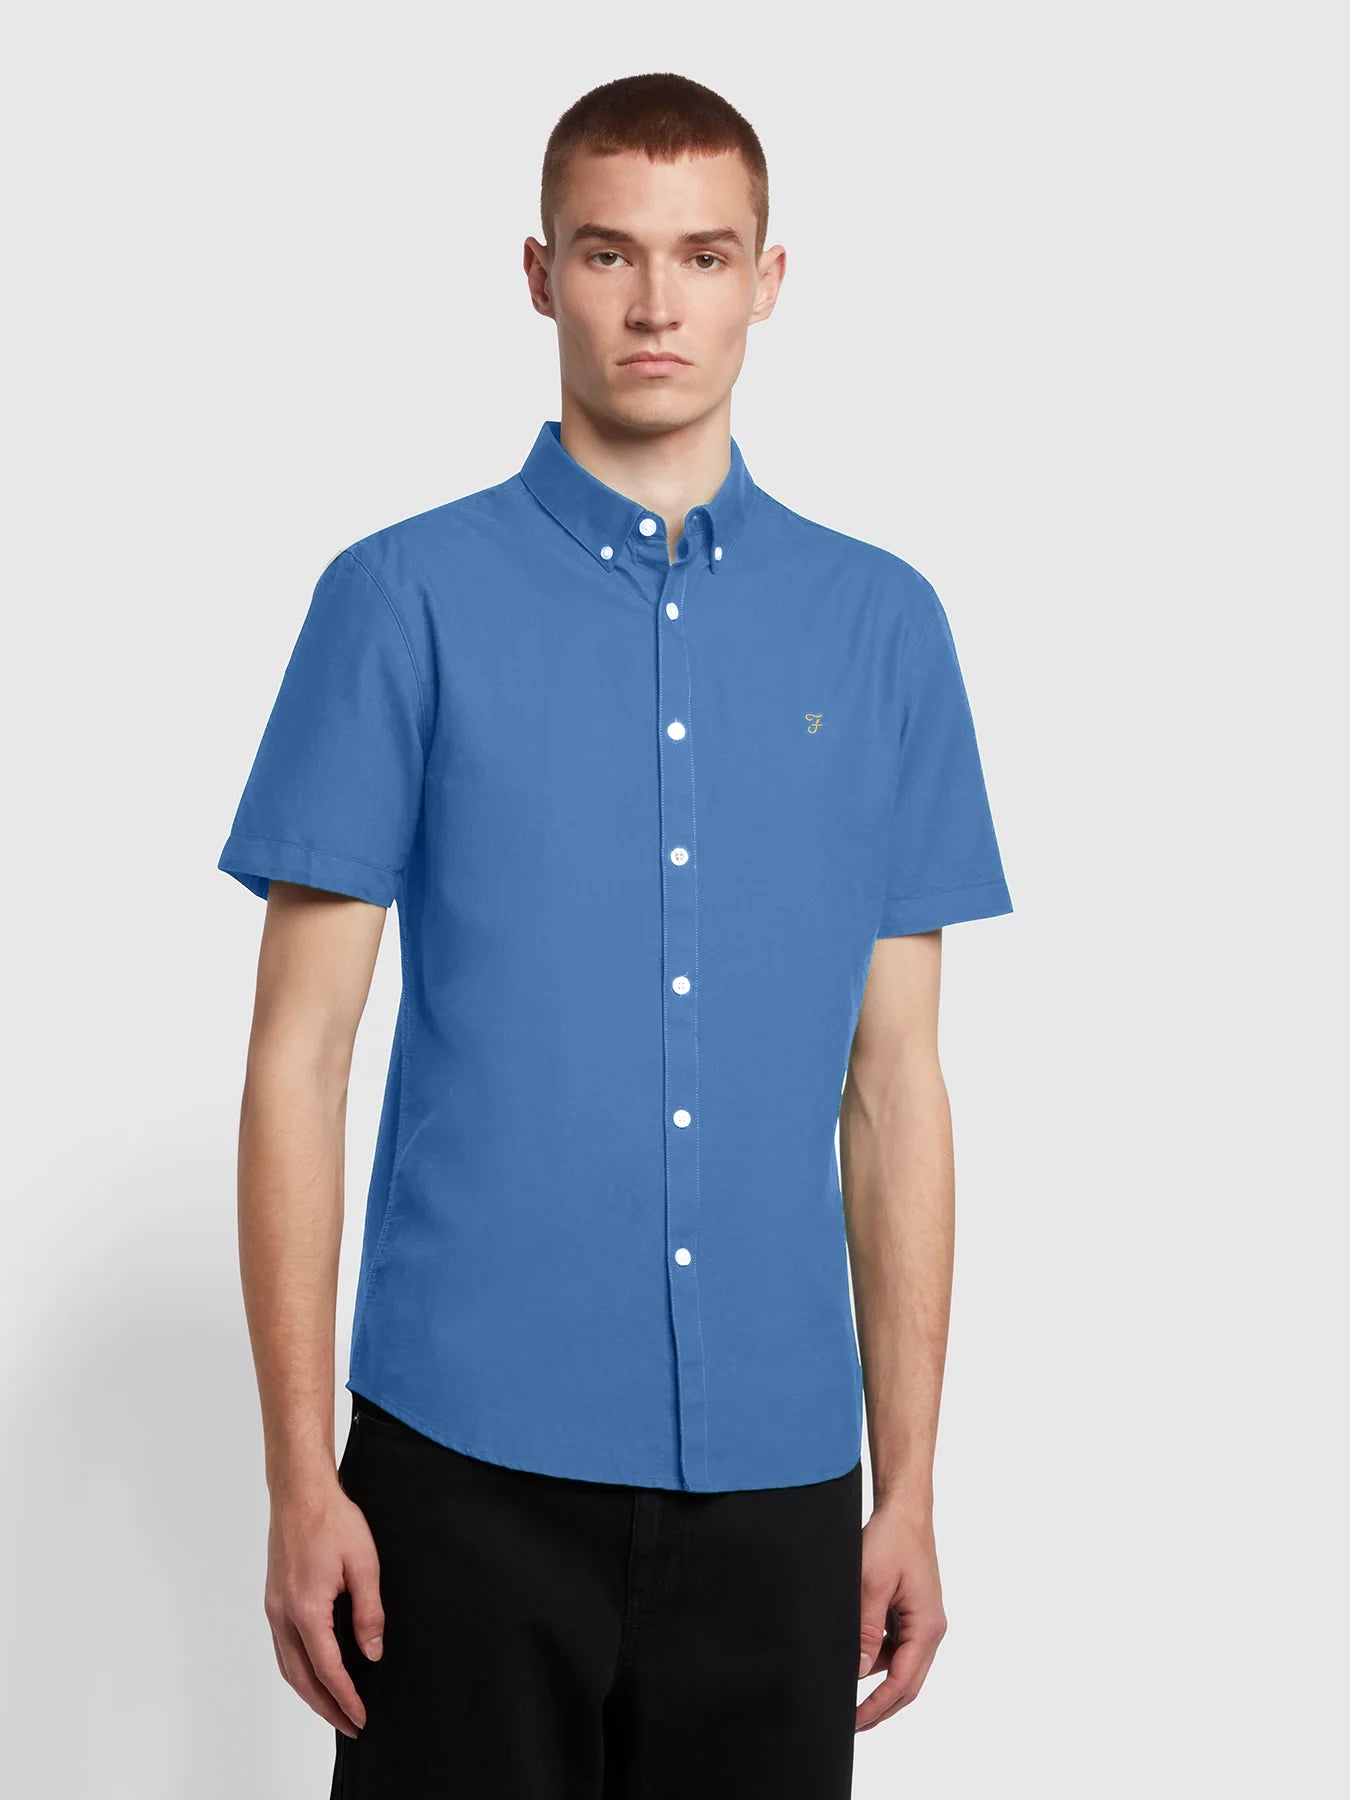 View Brewer Slim Fit Organic Cotton Shirt In Caribbean Blue information